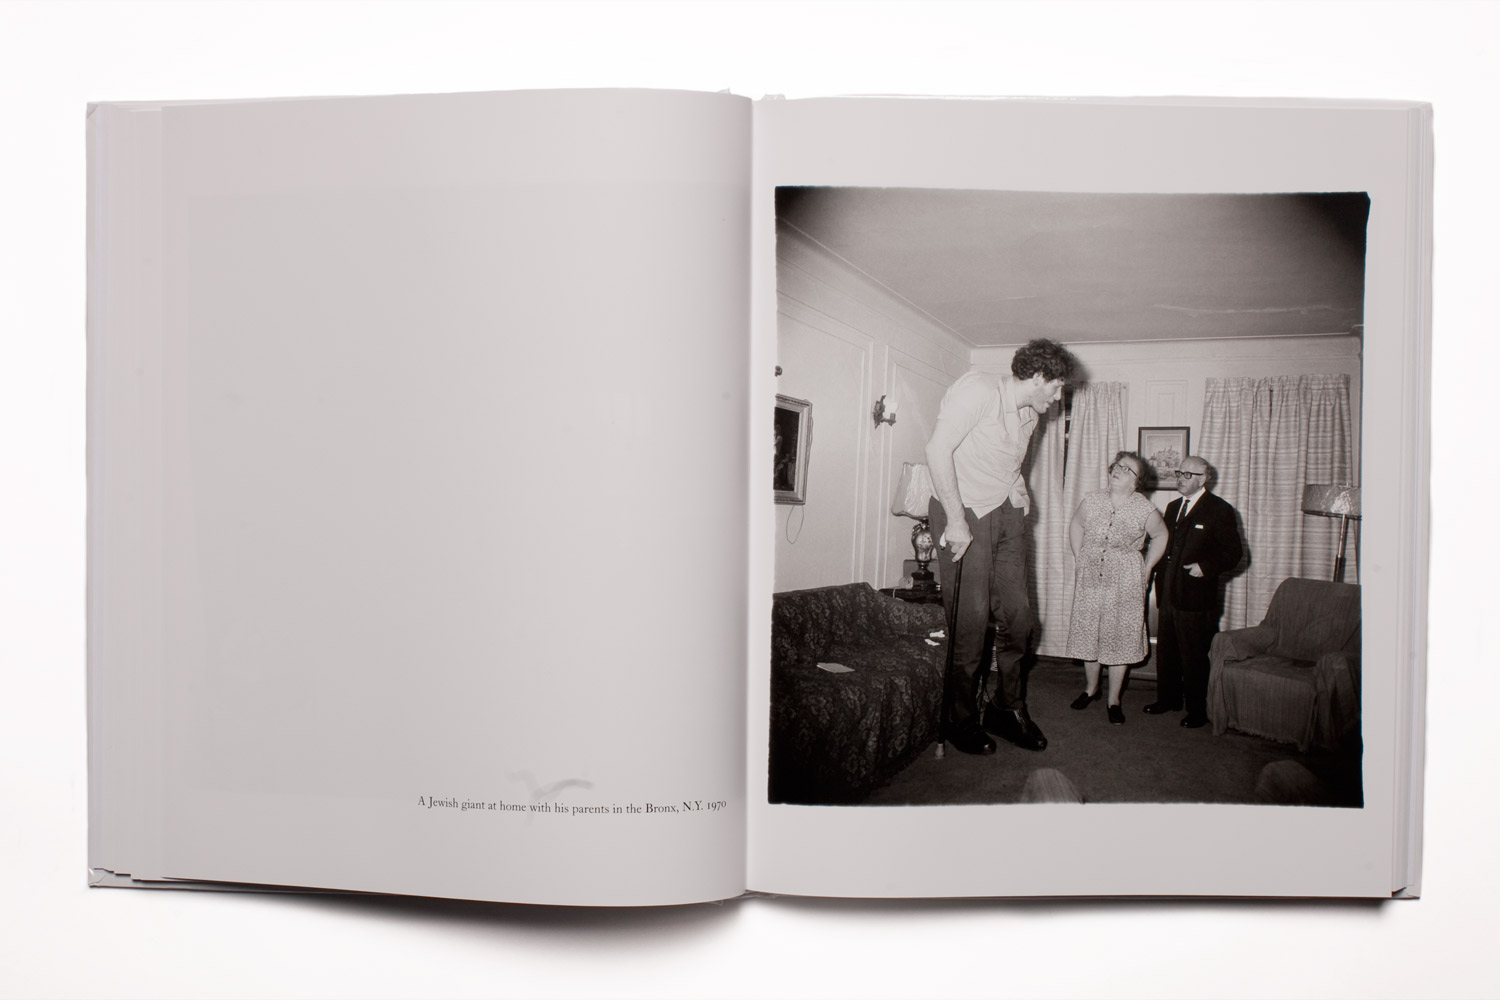 A new edition of one of the top-selling photobooks of all time—the 1972 Diane Arbus monograph from Aperture—is the first printing in which the image separations were created digitally.